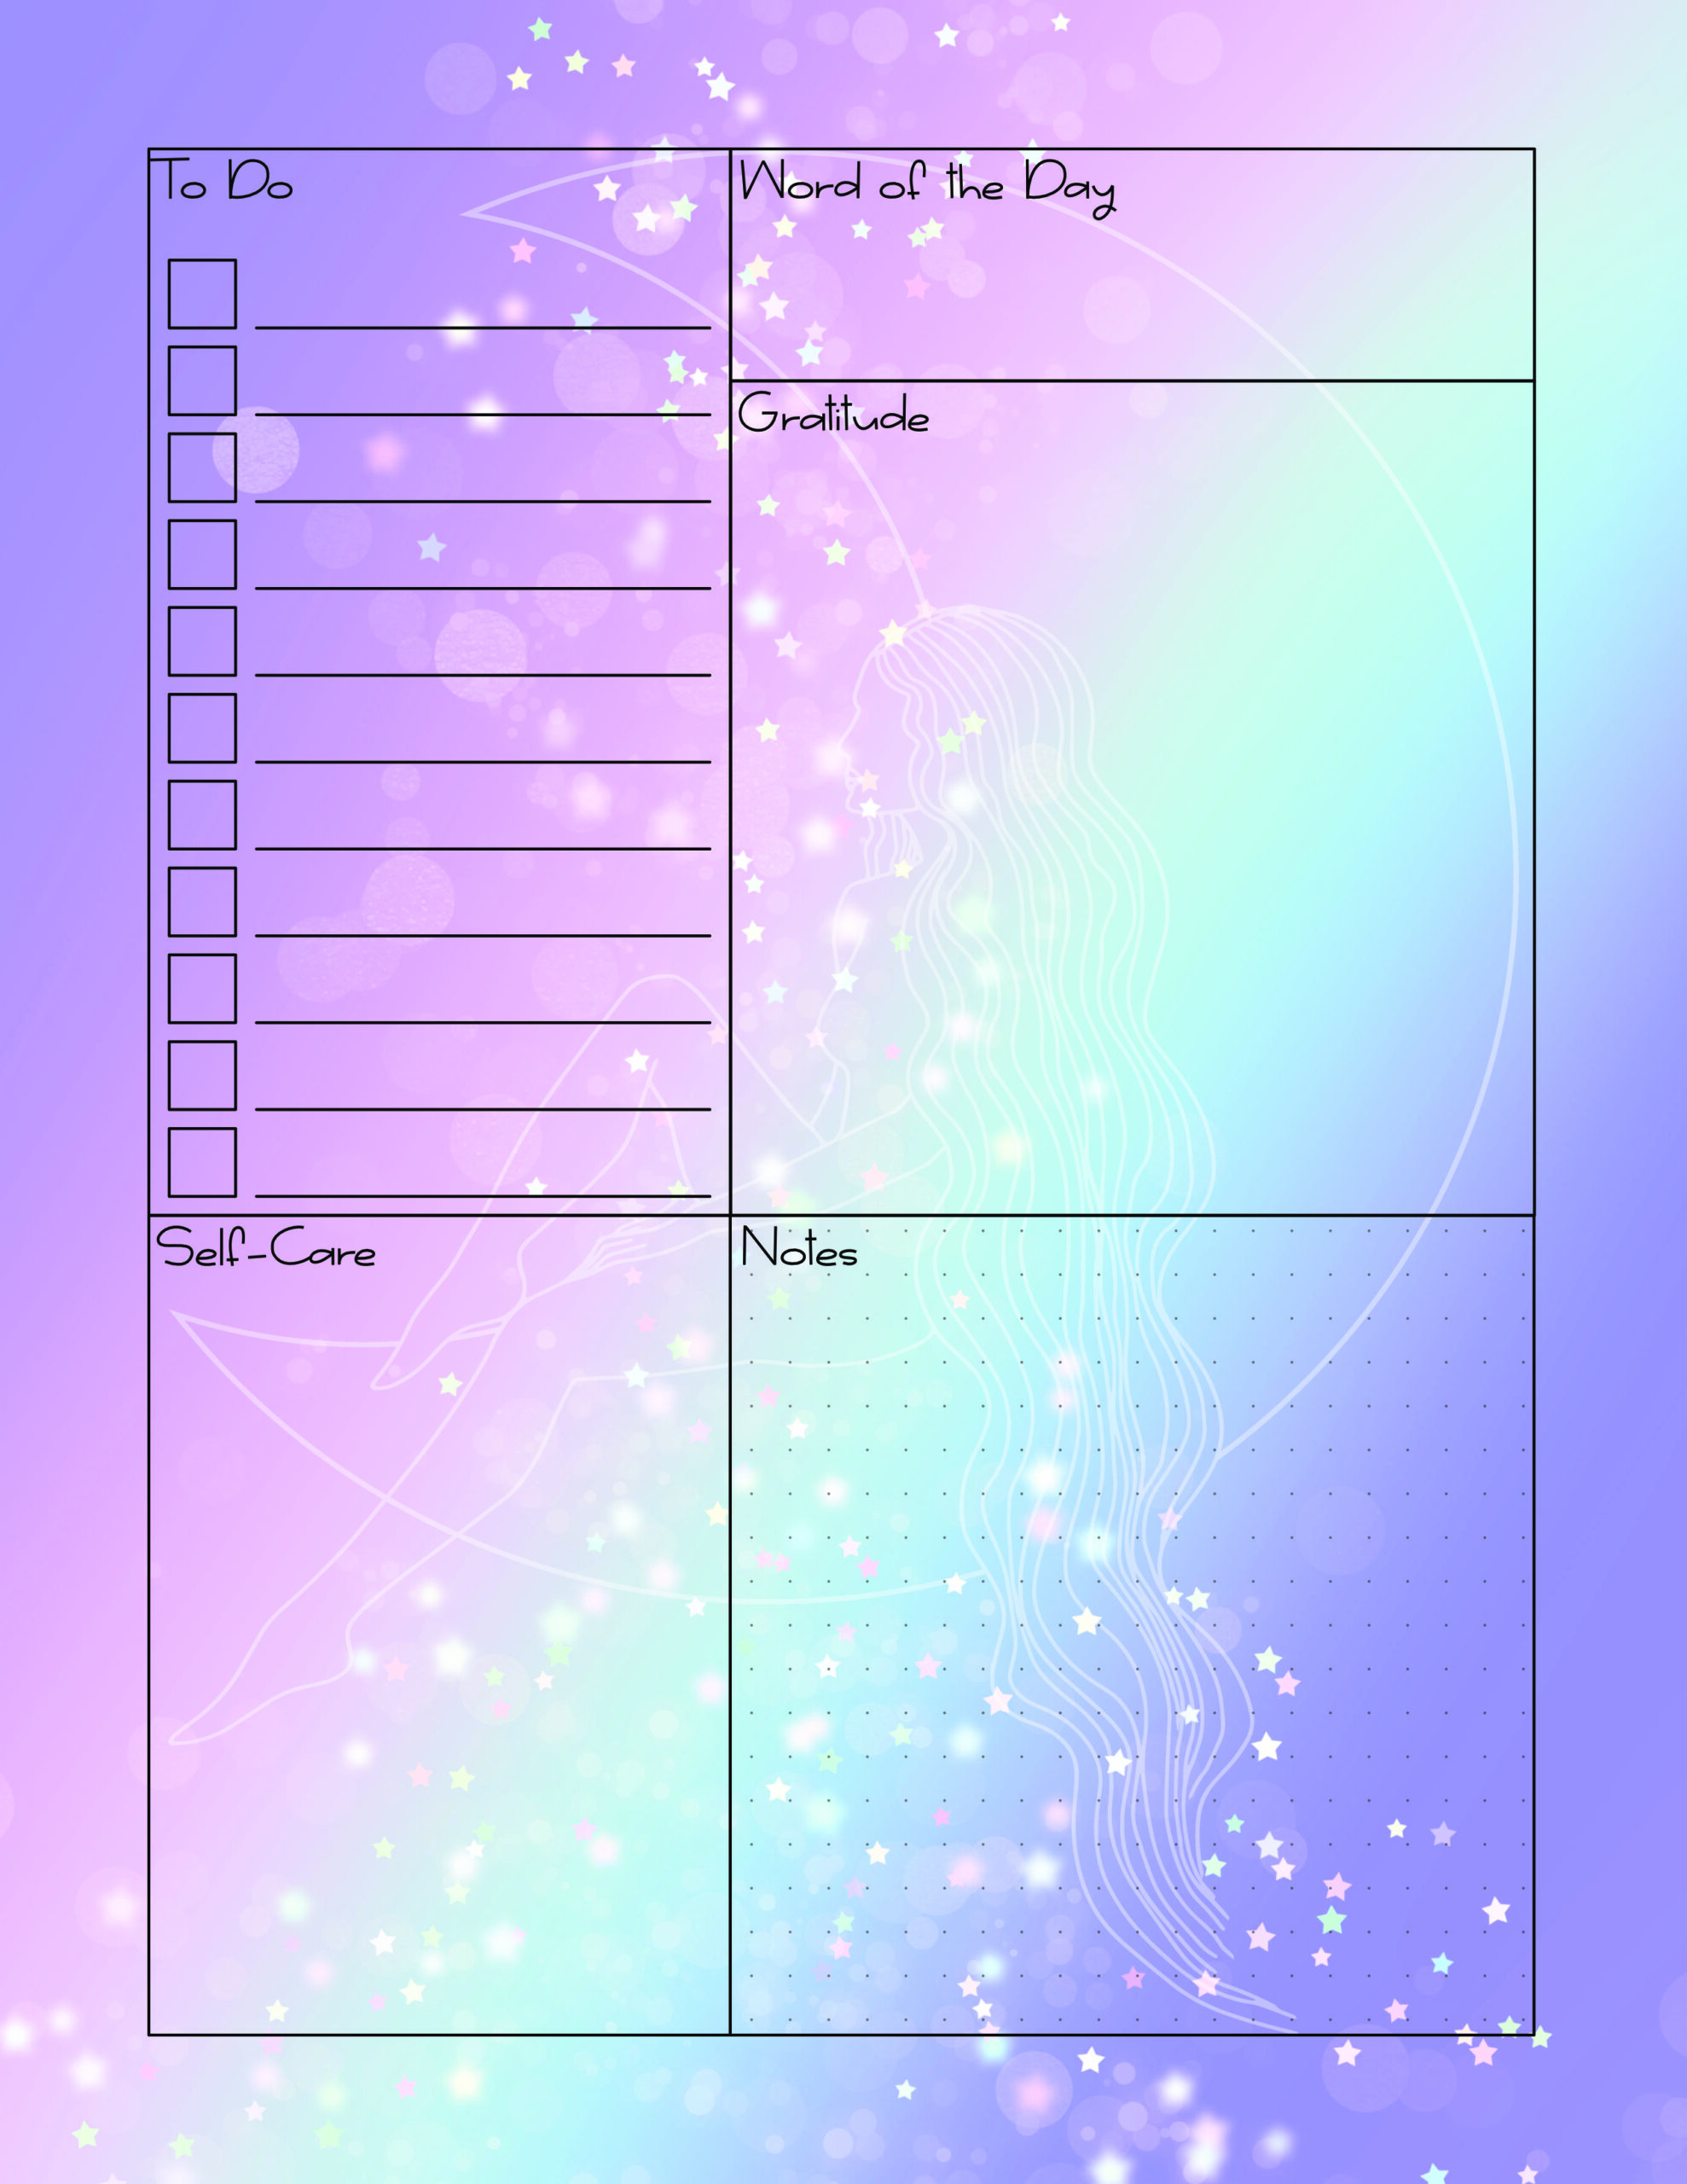 Daily Planner Printables